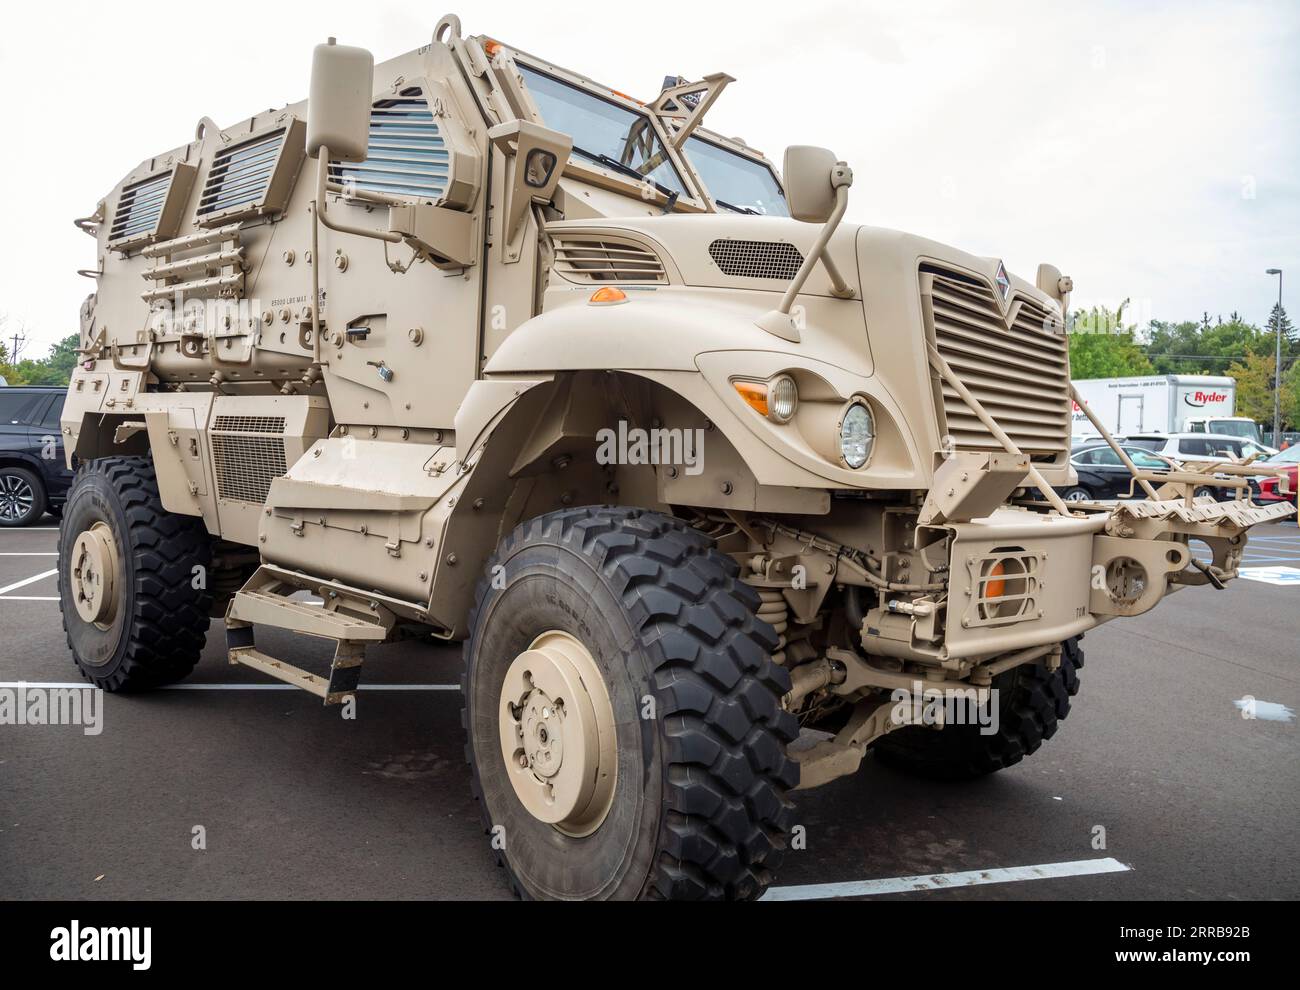 Novi, Michigan - Military contractors disiplay weapons for the U.S. Army at the Ground Vehicle Systems Engineering & Technology Symposium (GVSETS). Na Stock Photo